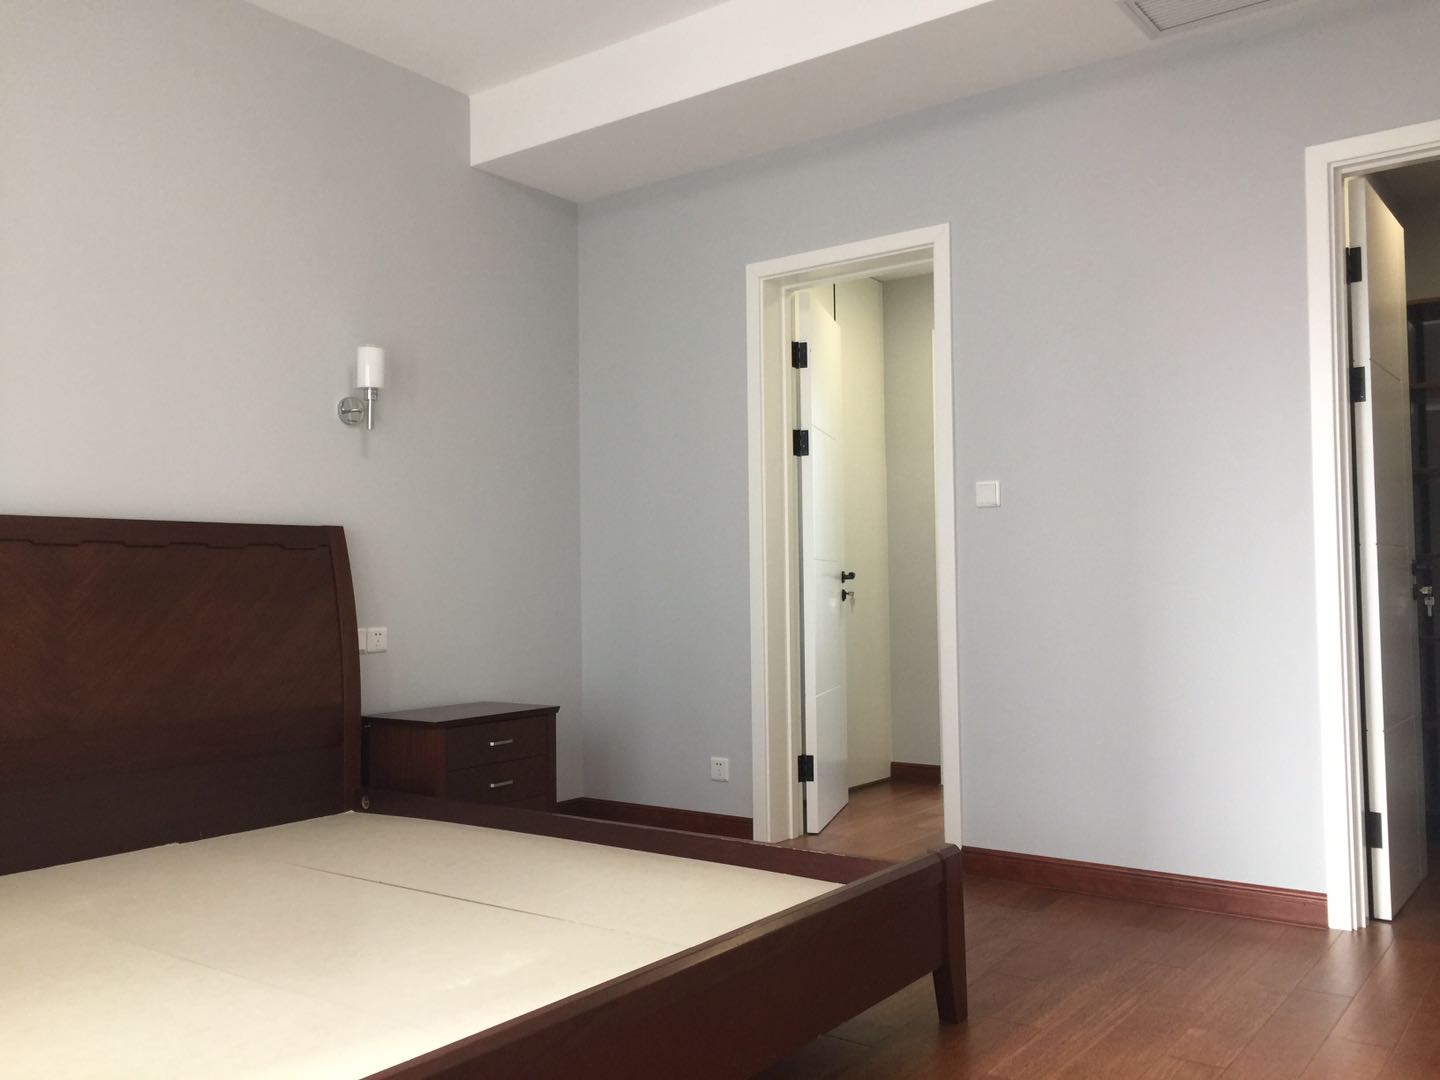 new bed Brand-new Spacious LJZ CBD Apartment for Rent in Shanghai